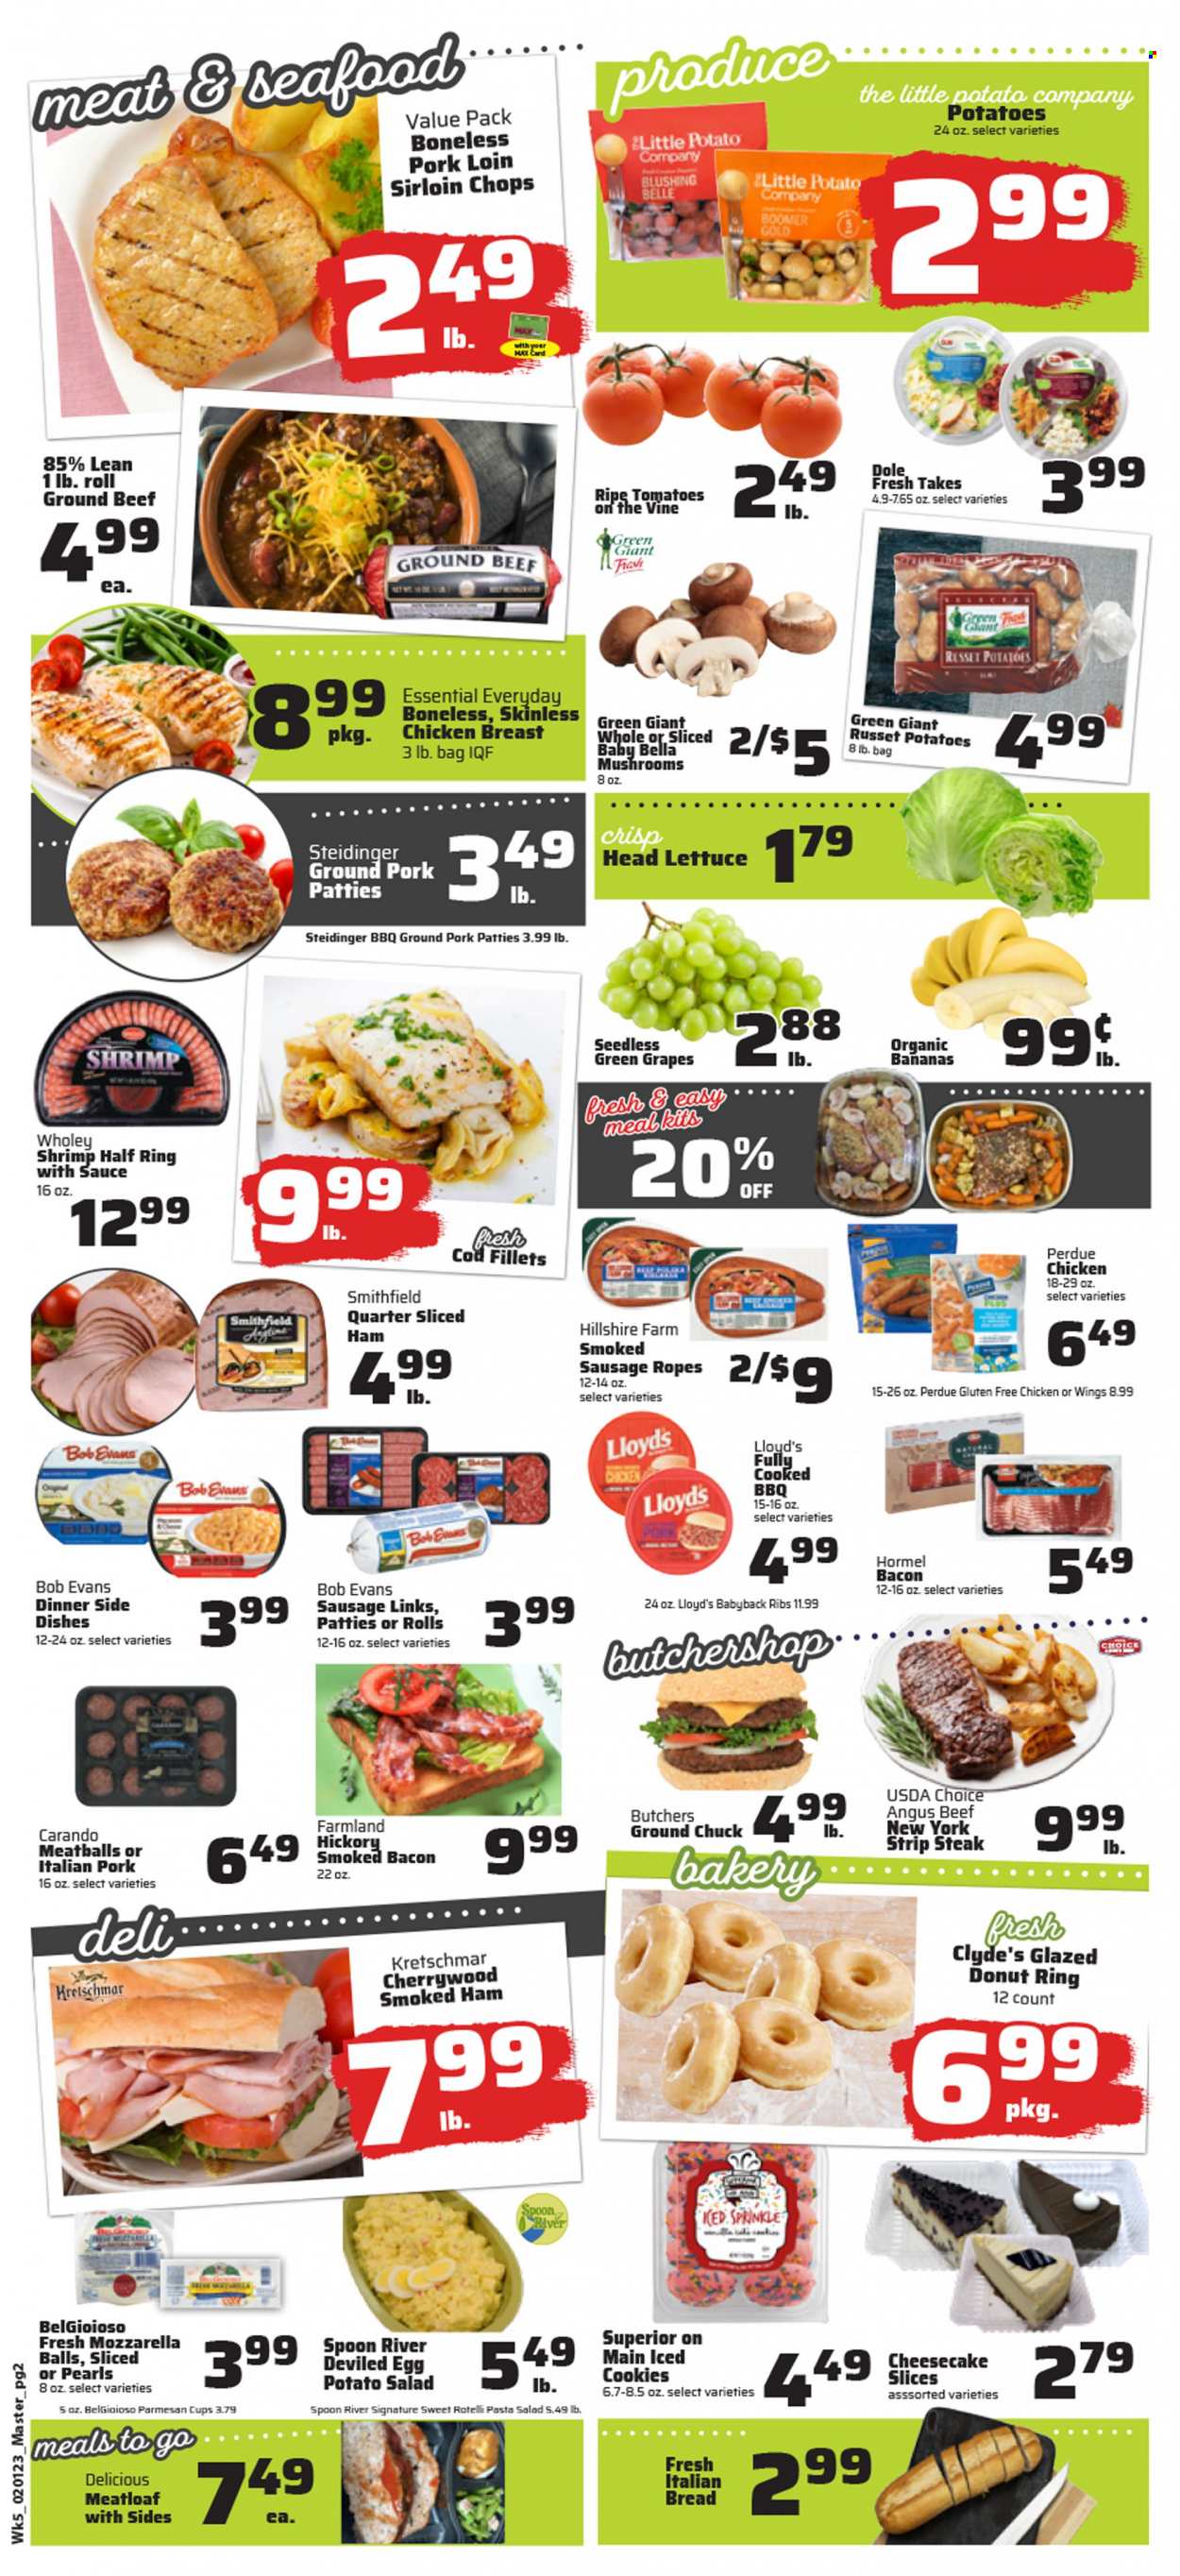 thumbnail - County Market Flyer - 02/01/2023 - 02/07/2023 - Sales products - mushrooms, bread, cheesecake, donut, russet potatoes, tomatoes, potatoes, lettuce, salad, Dole, bananas, grapes, organic bananas, cod, seafood, shrimps, meatballs, pasta, meatloaf, Perdue®, Bob Evans, Hormel, bacon, ham, Hillshire Farm, smoked ham, sausage, smoked sausage, potato salad, pasta salad, parmesan, eggs, cookies, chicken breasts, beef meat, ground beef, ground chuck, steak, striploin steak, ribs, ground pork, pork loin, pork meat. Page 2.